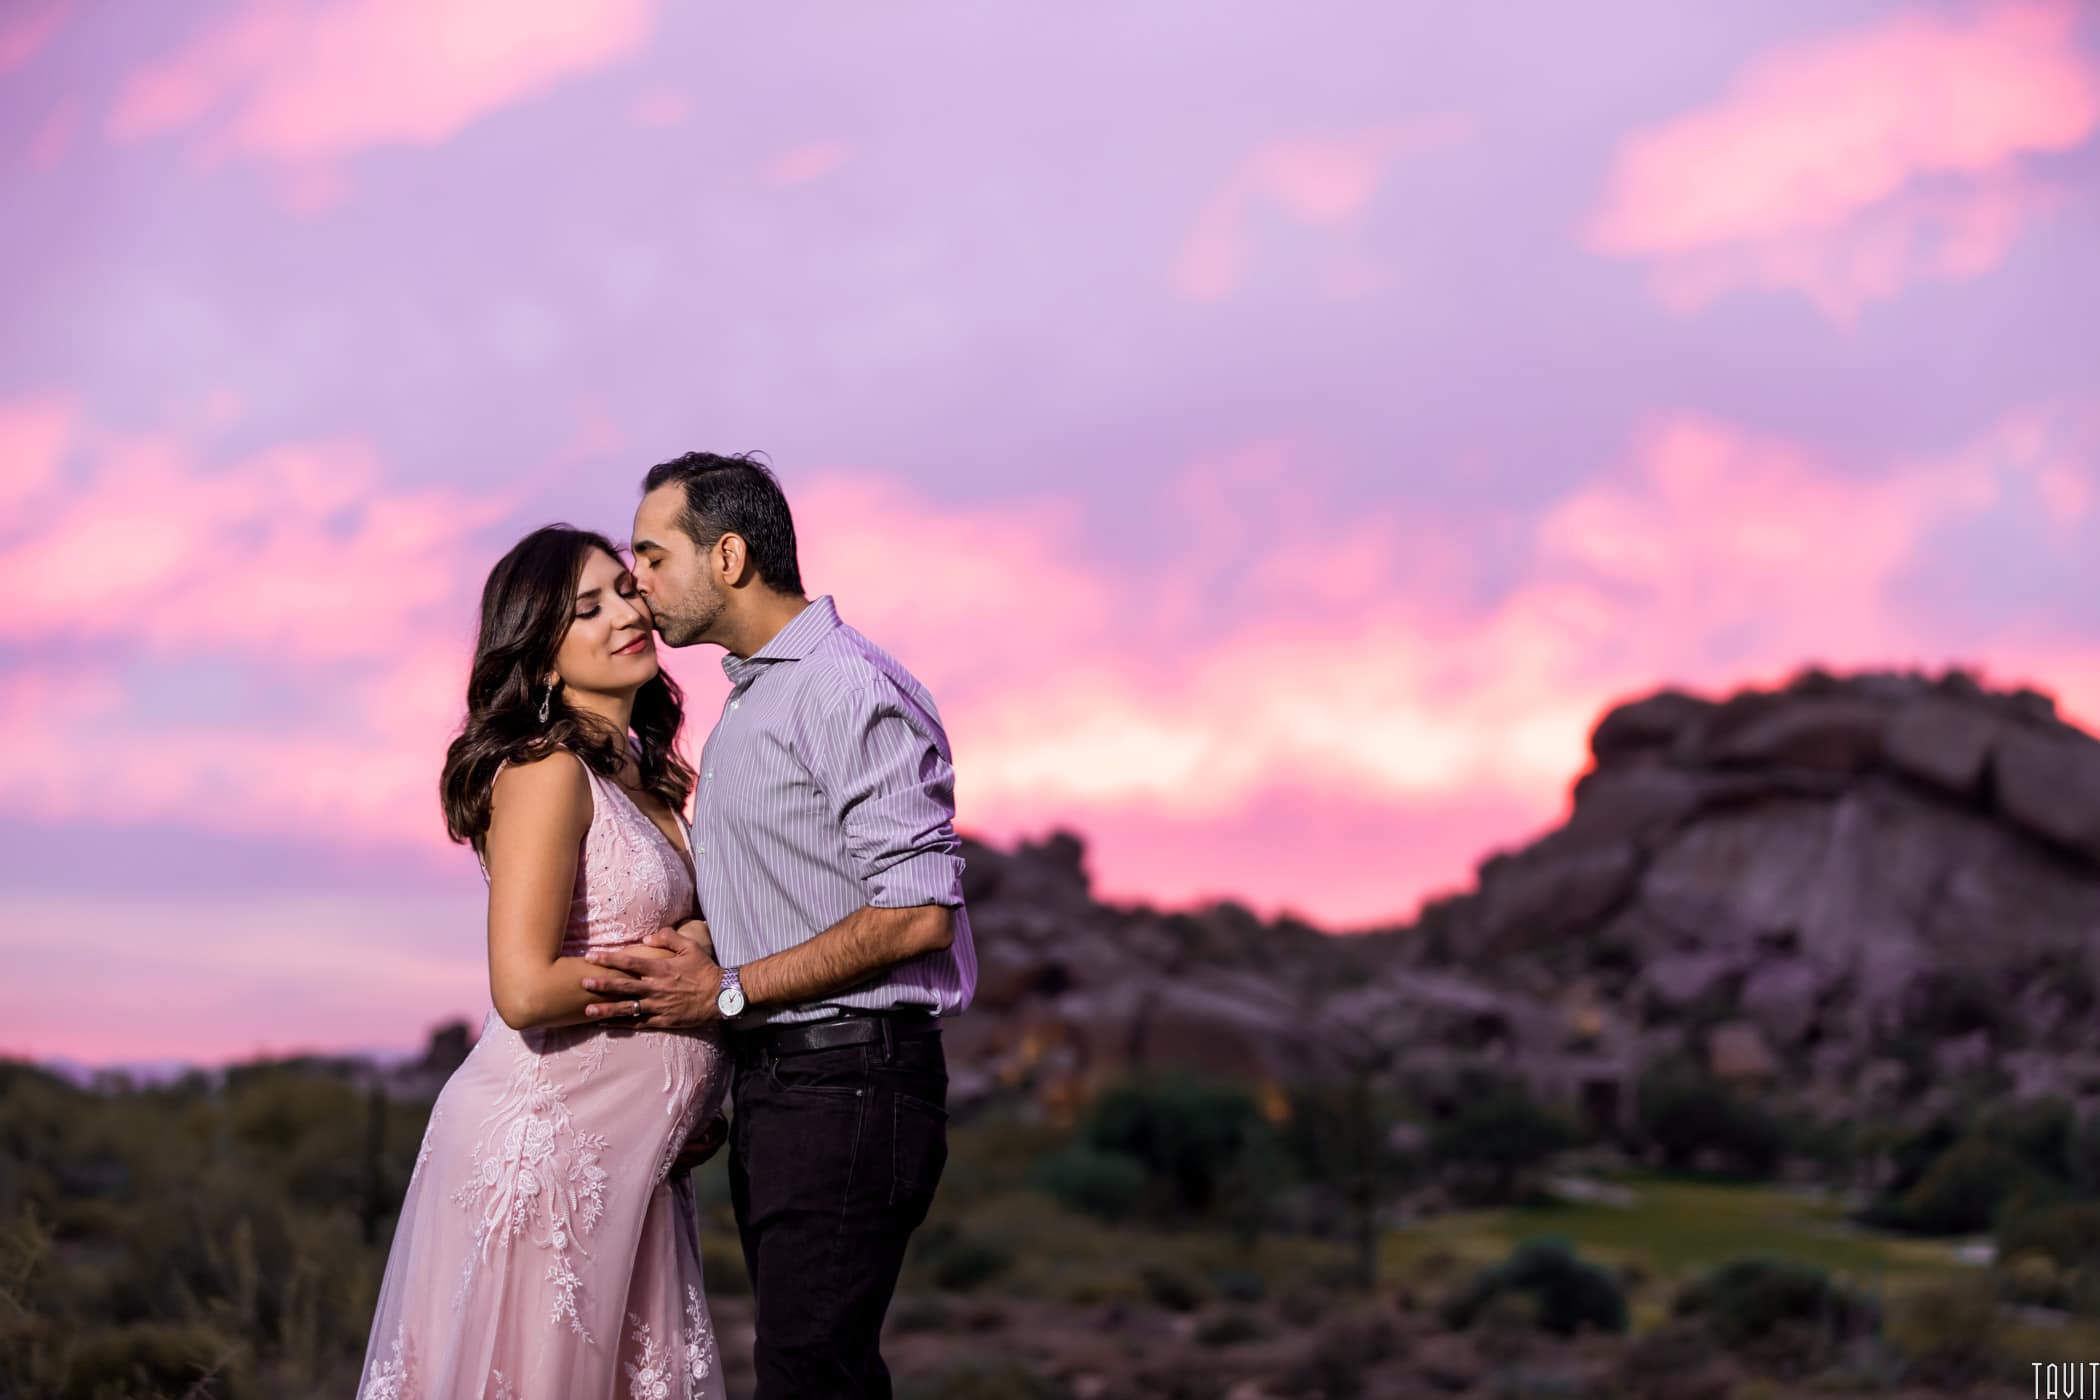 Couple together at sunset maternity shoot